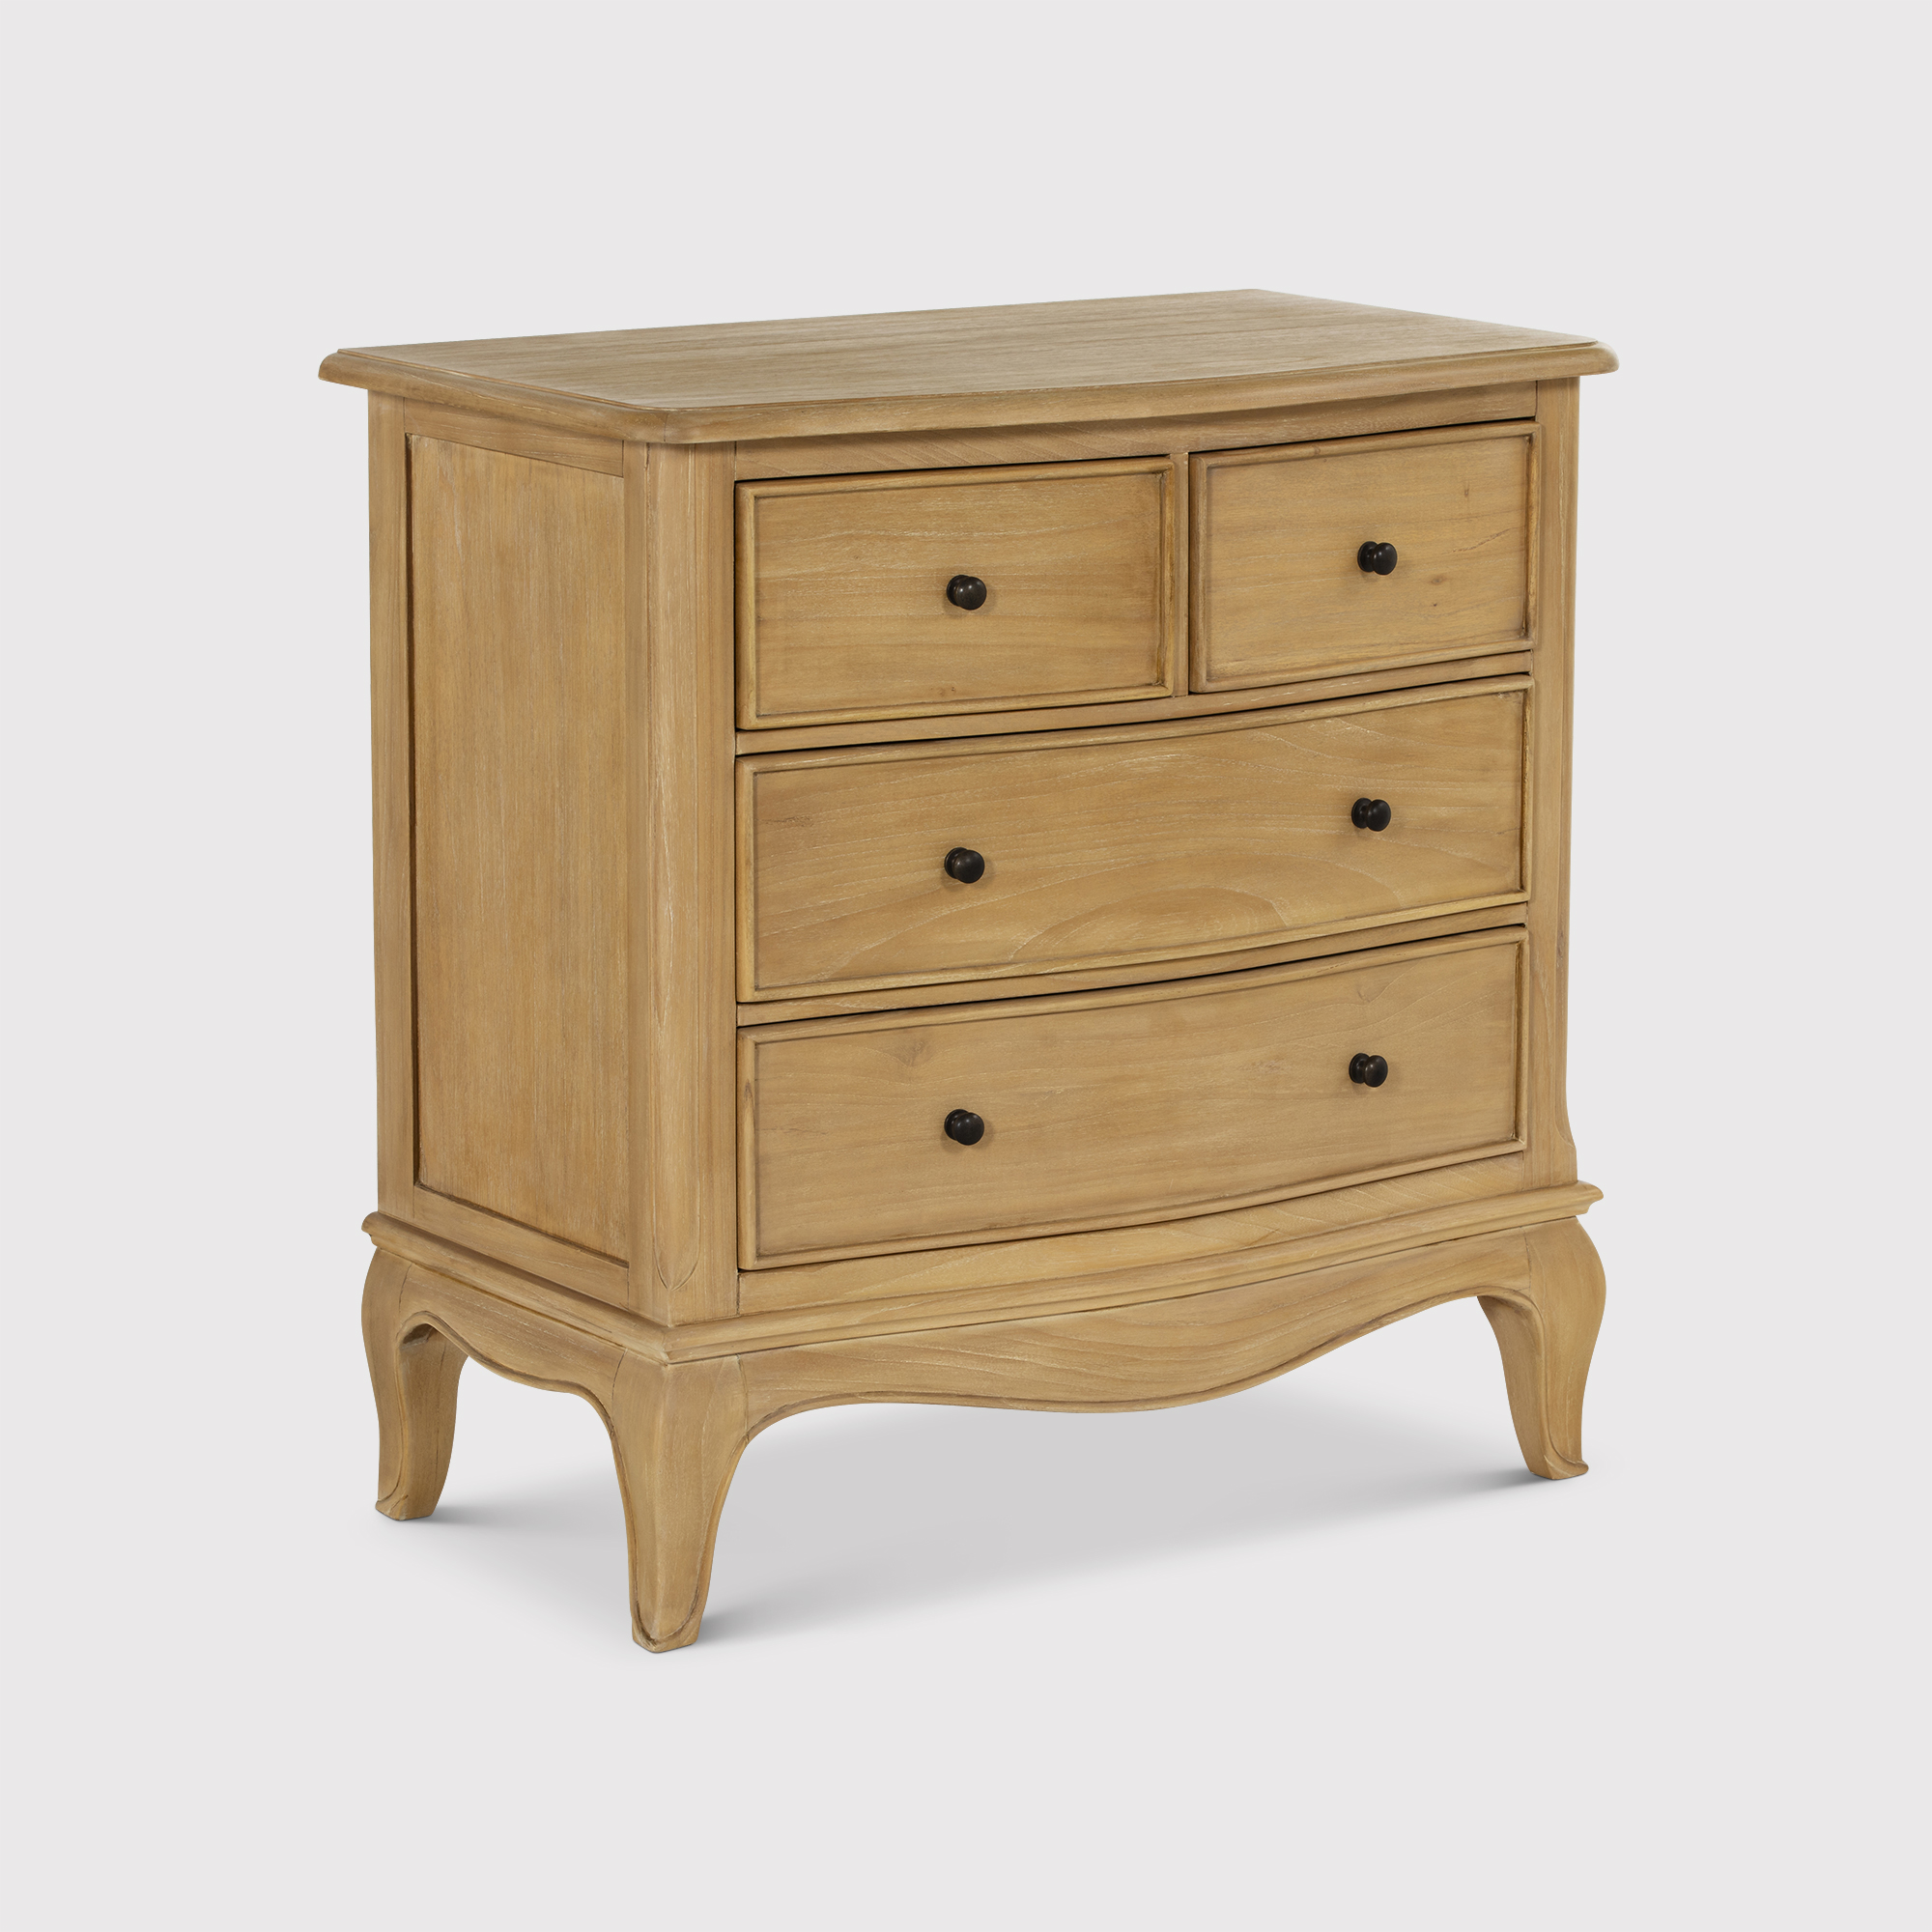 Cecile 4 Drawer Chest, Neutral Wood | Barker & Stonehouse